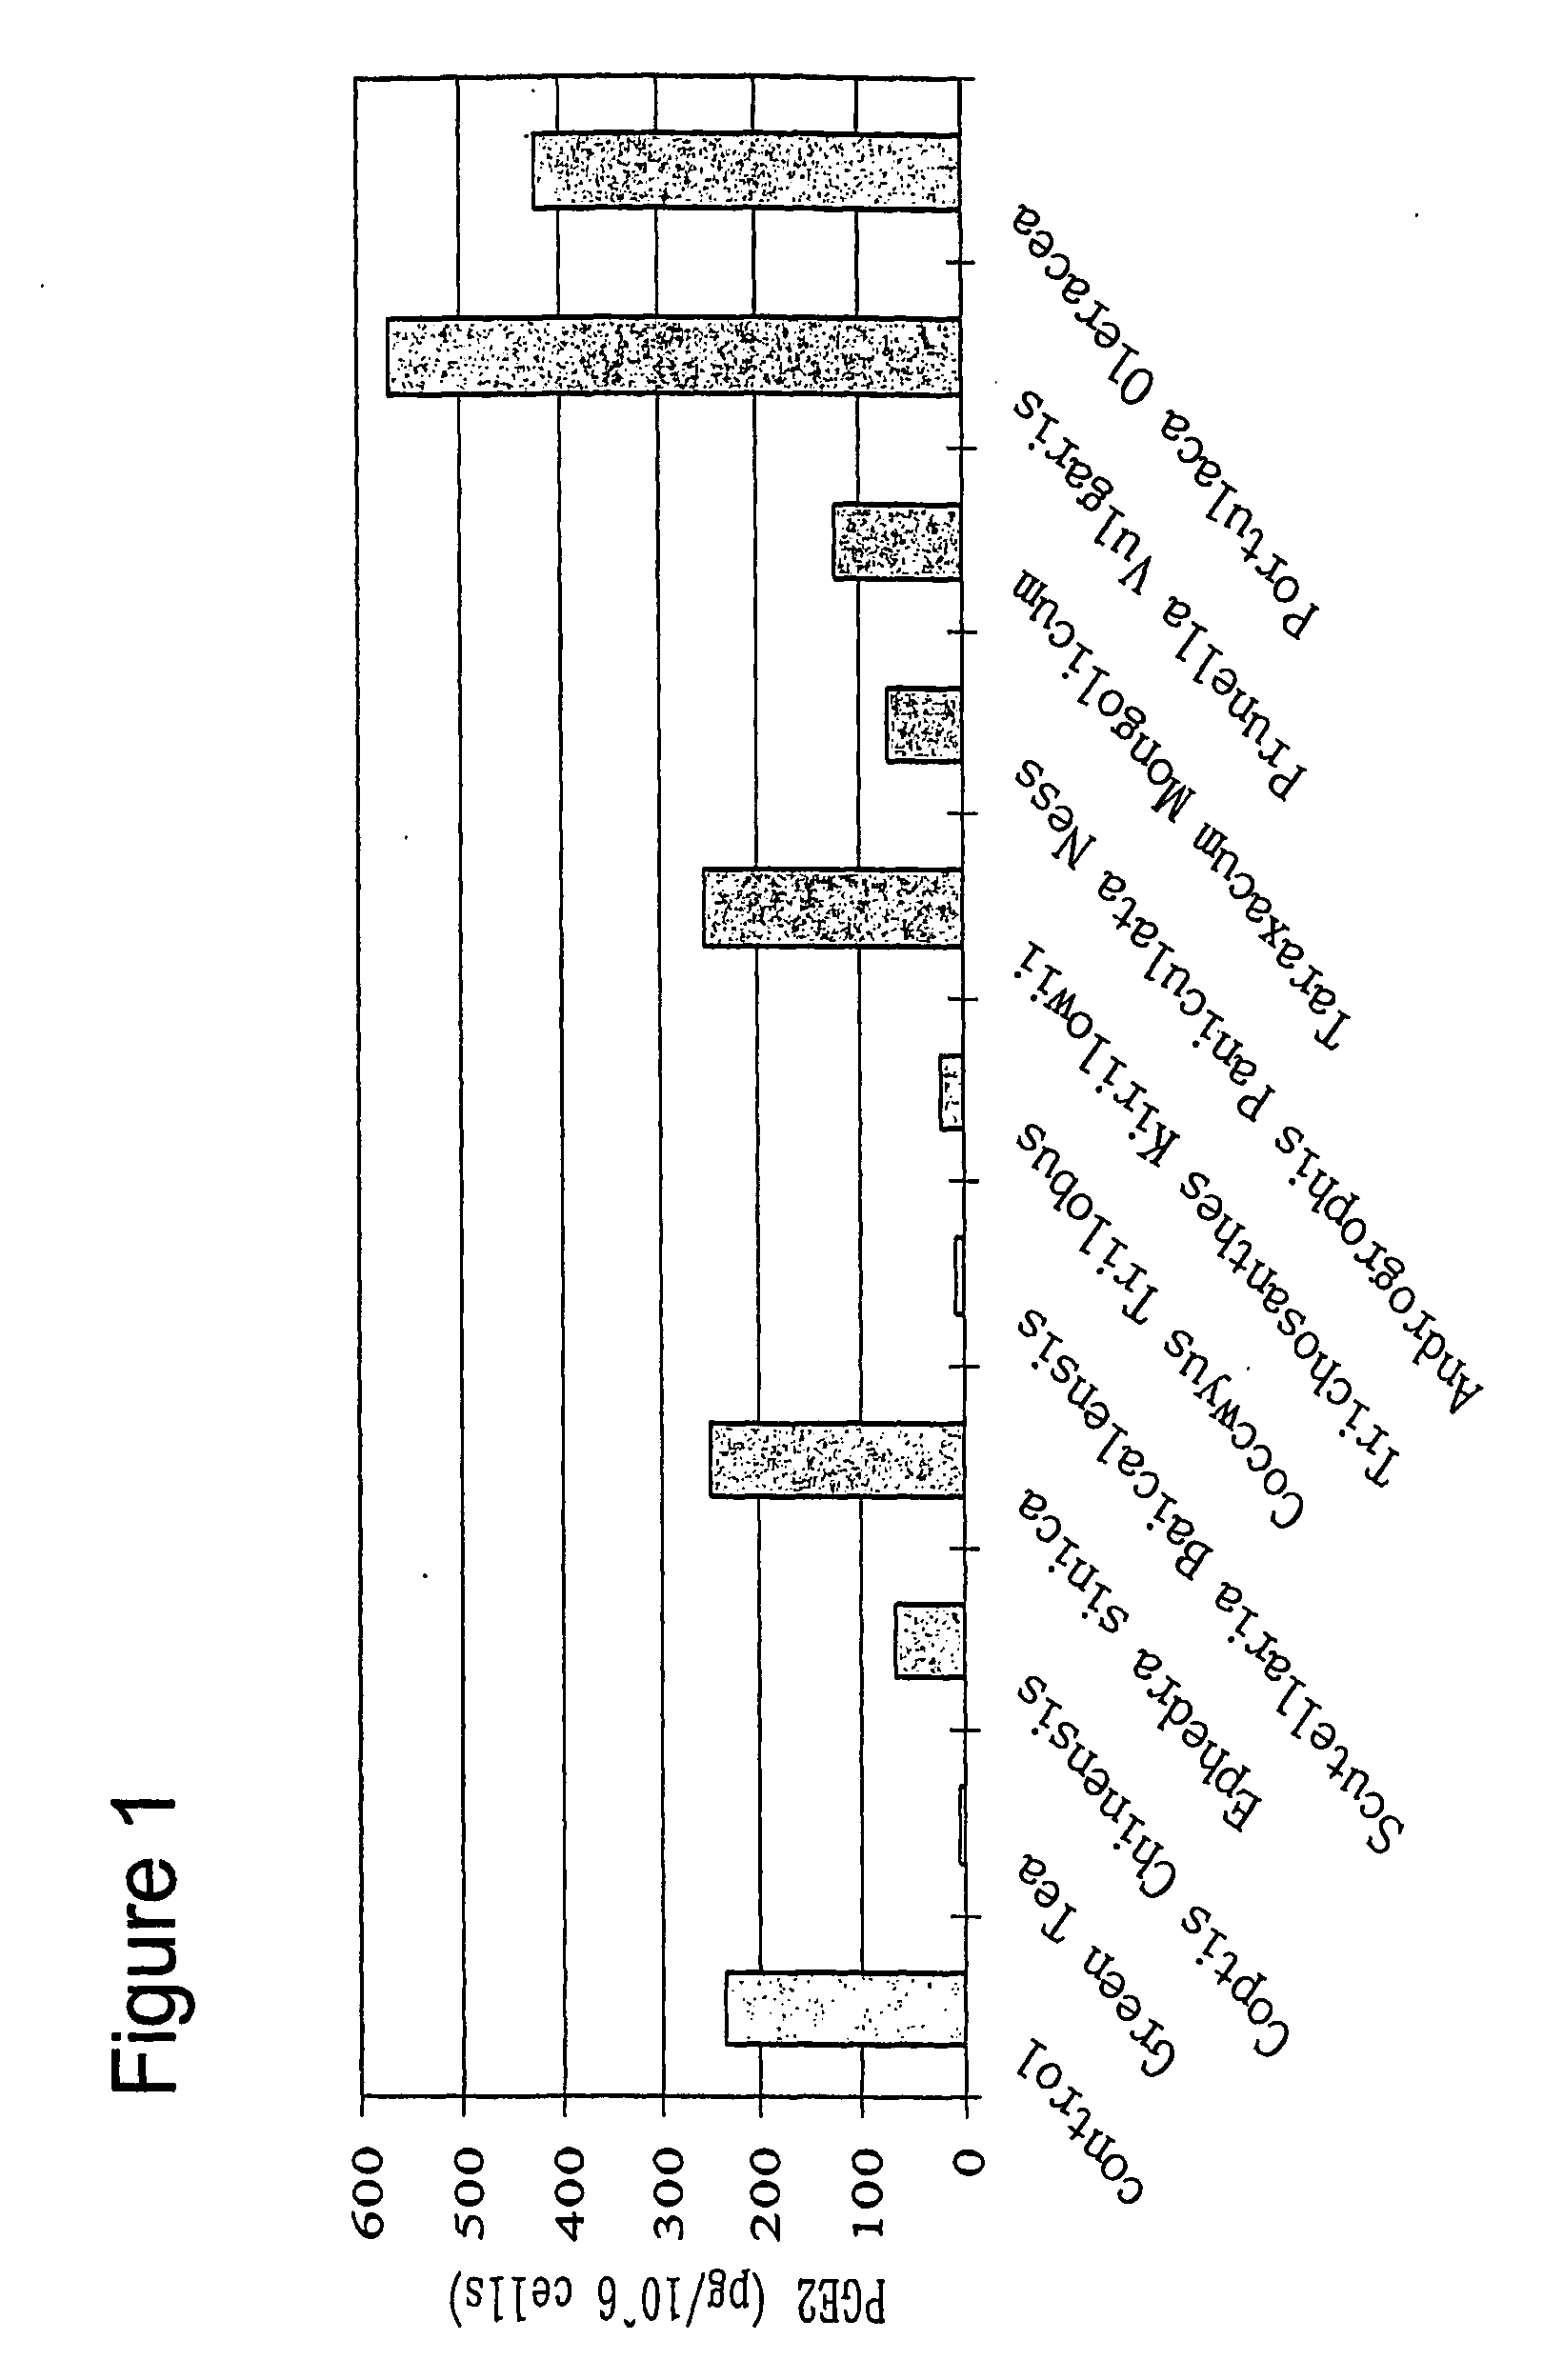 Composition comprising scutellaria baicalensis and their uses thereof